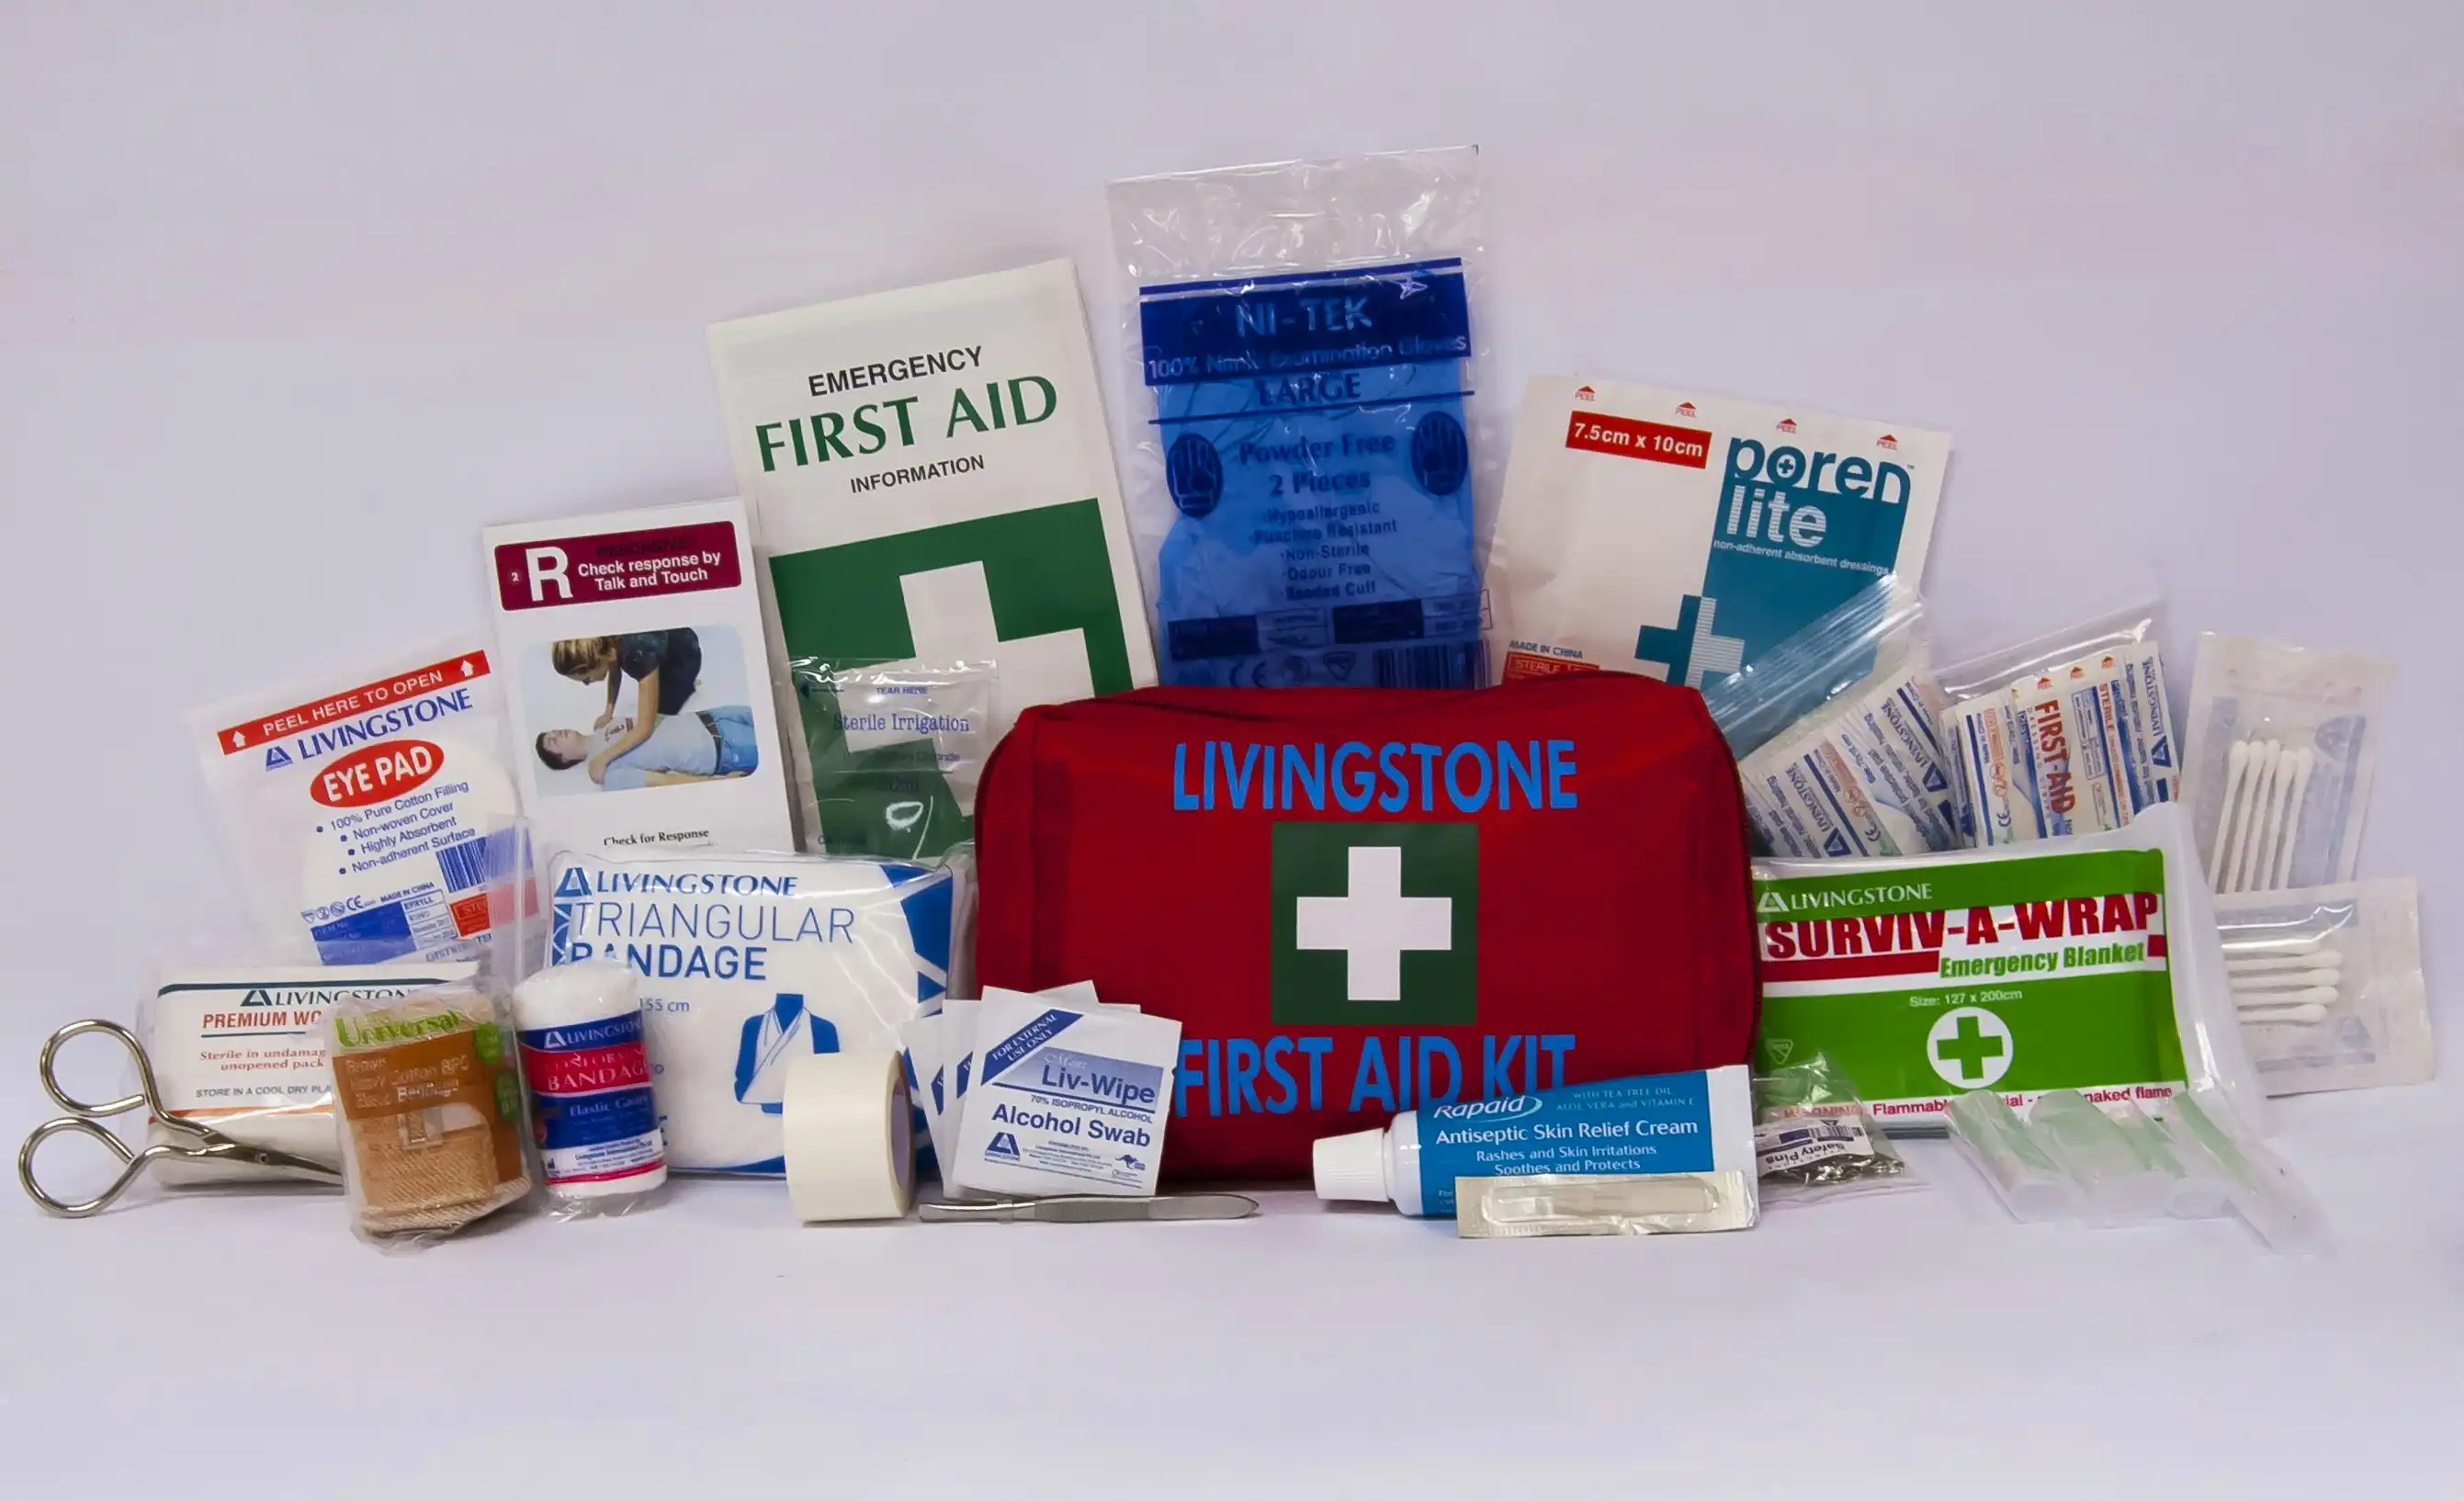 Livingstone Work Vehicle First Aid Kit, Small, 18 x 11 x 7cm Pouch, Red, Complete Set In Nylon Pouch x3